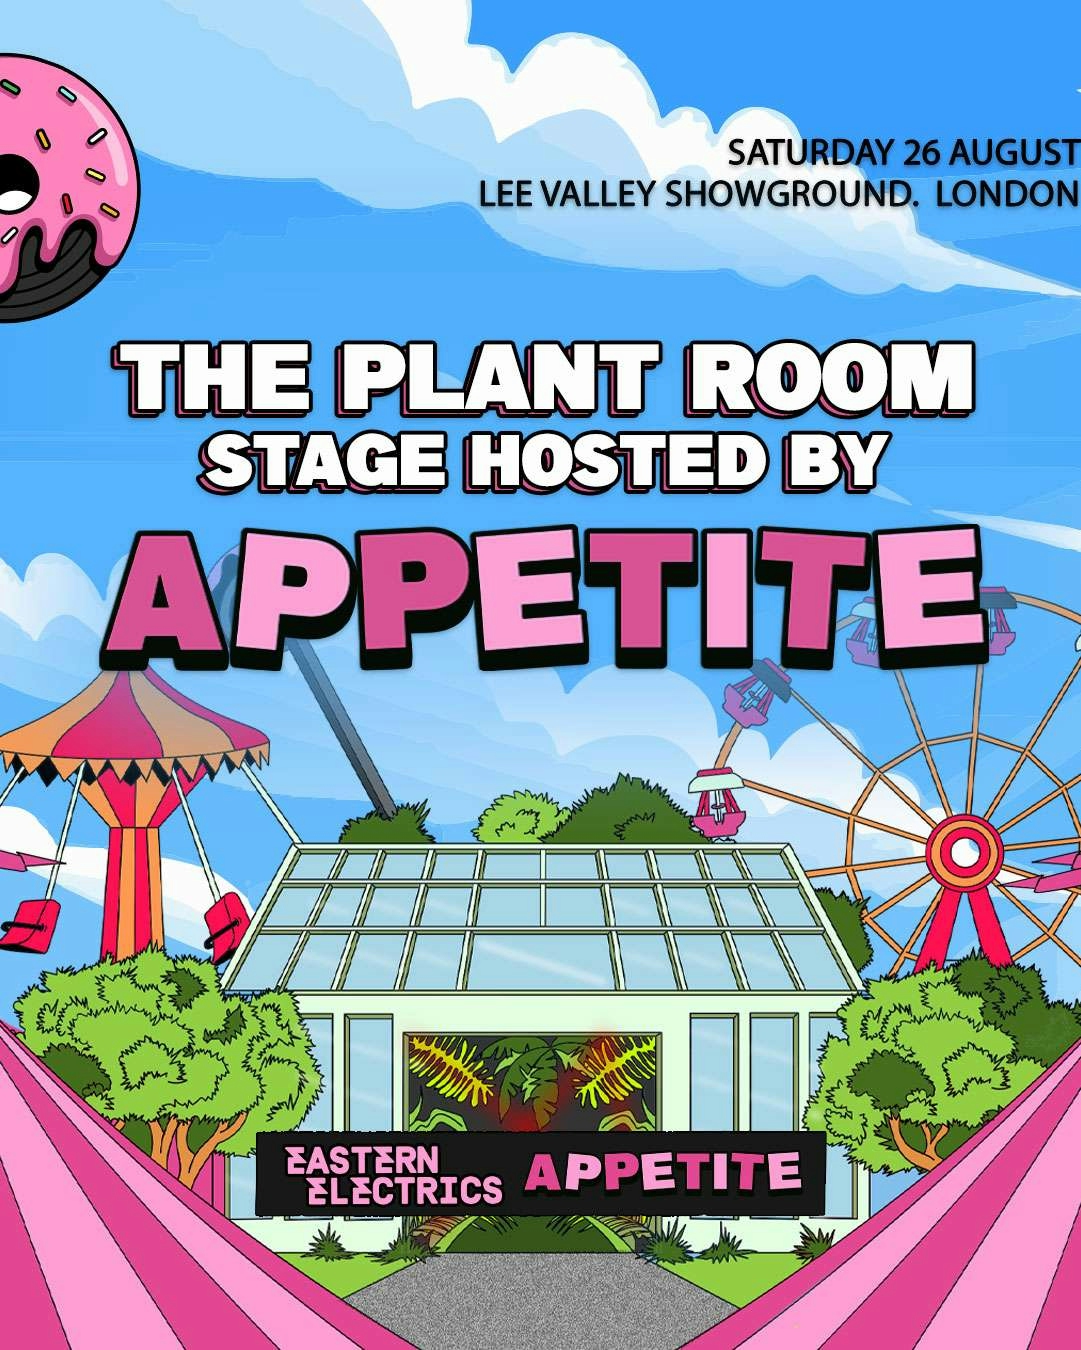 Get to know The Plant Room Stage hosted by Appetite